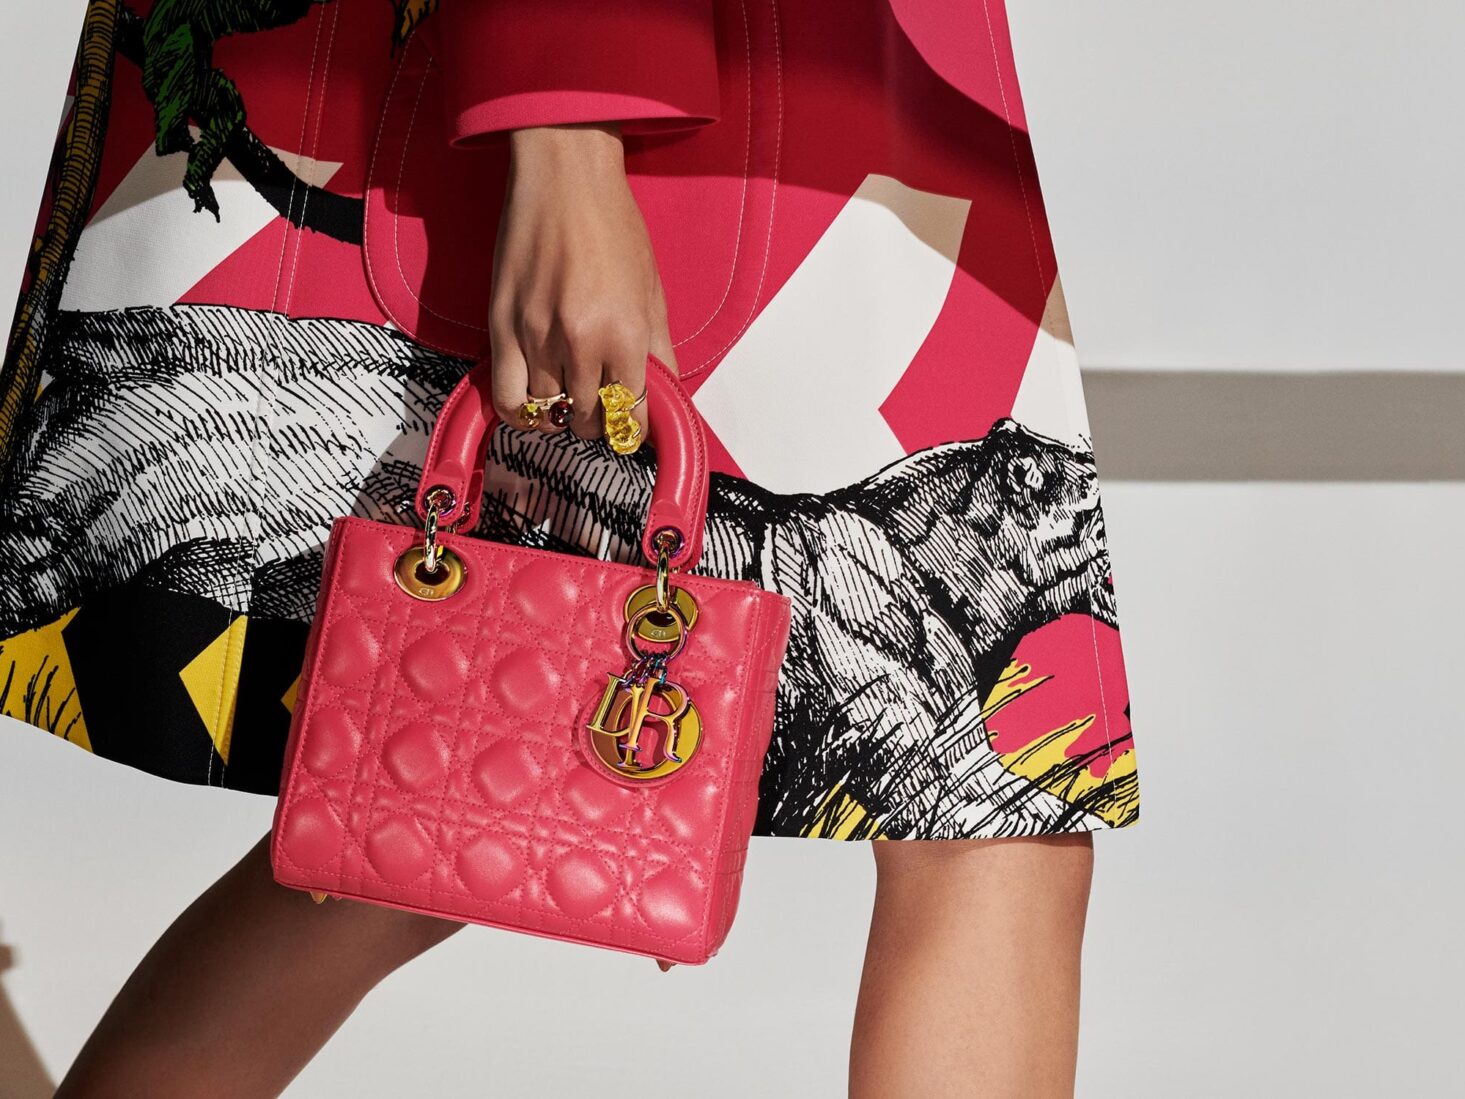 Seven artists take on the Lady Dior bag  The Week UK